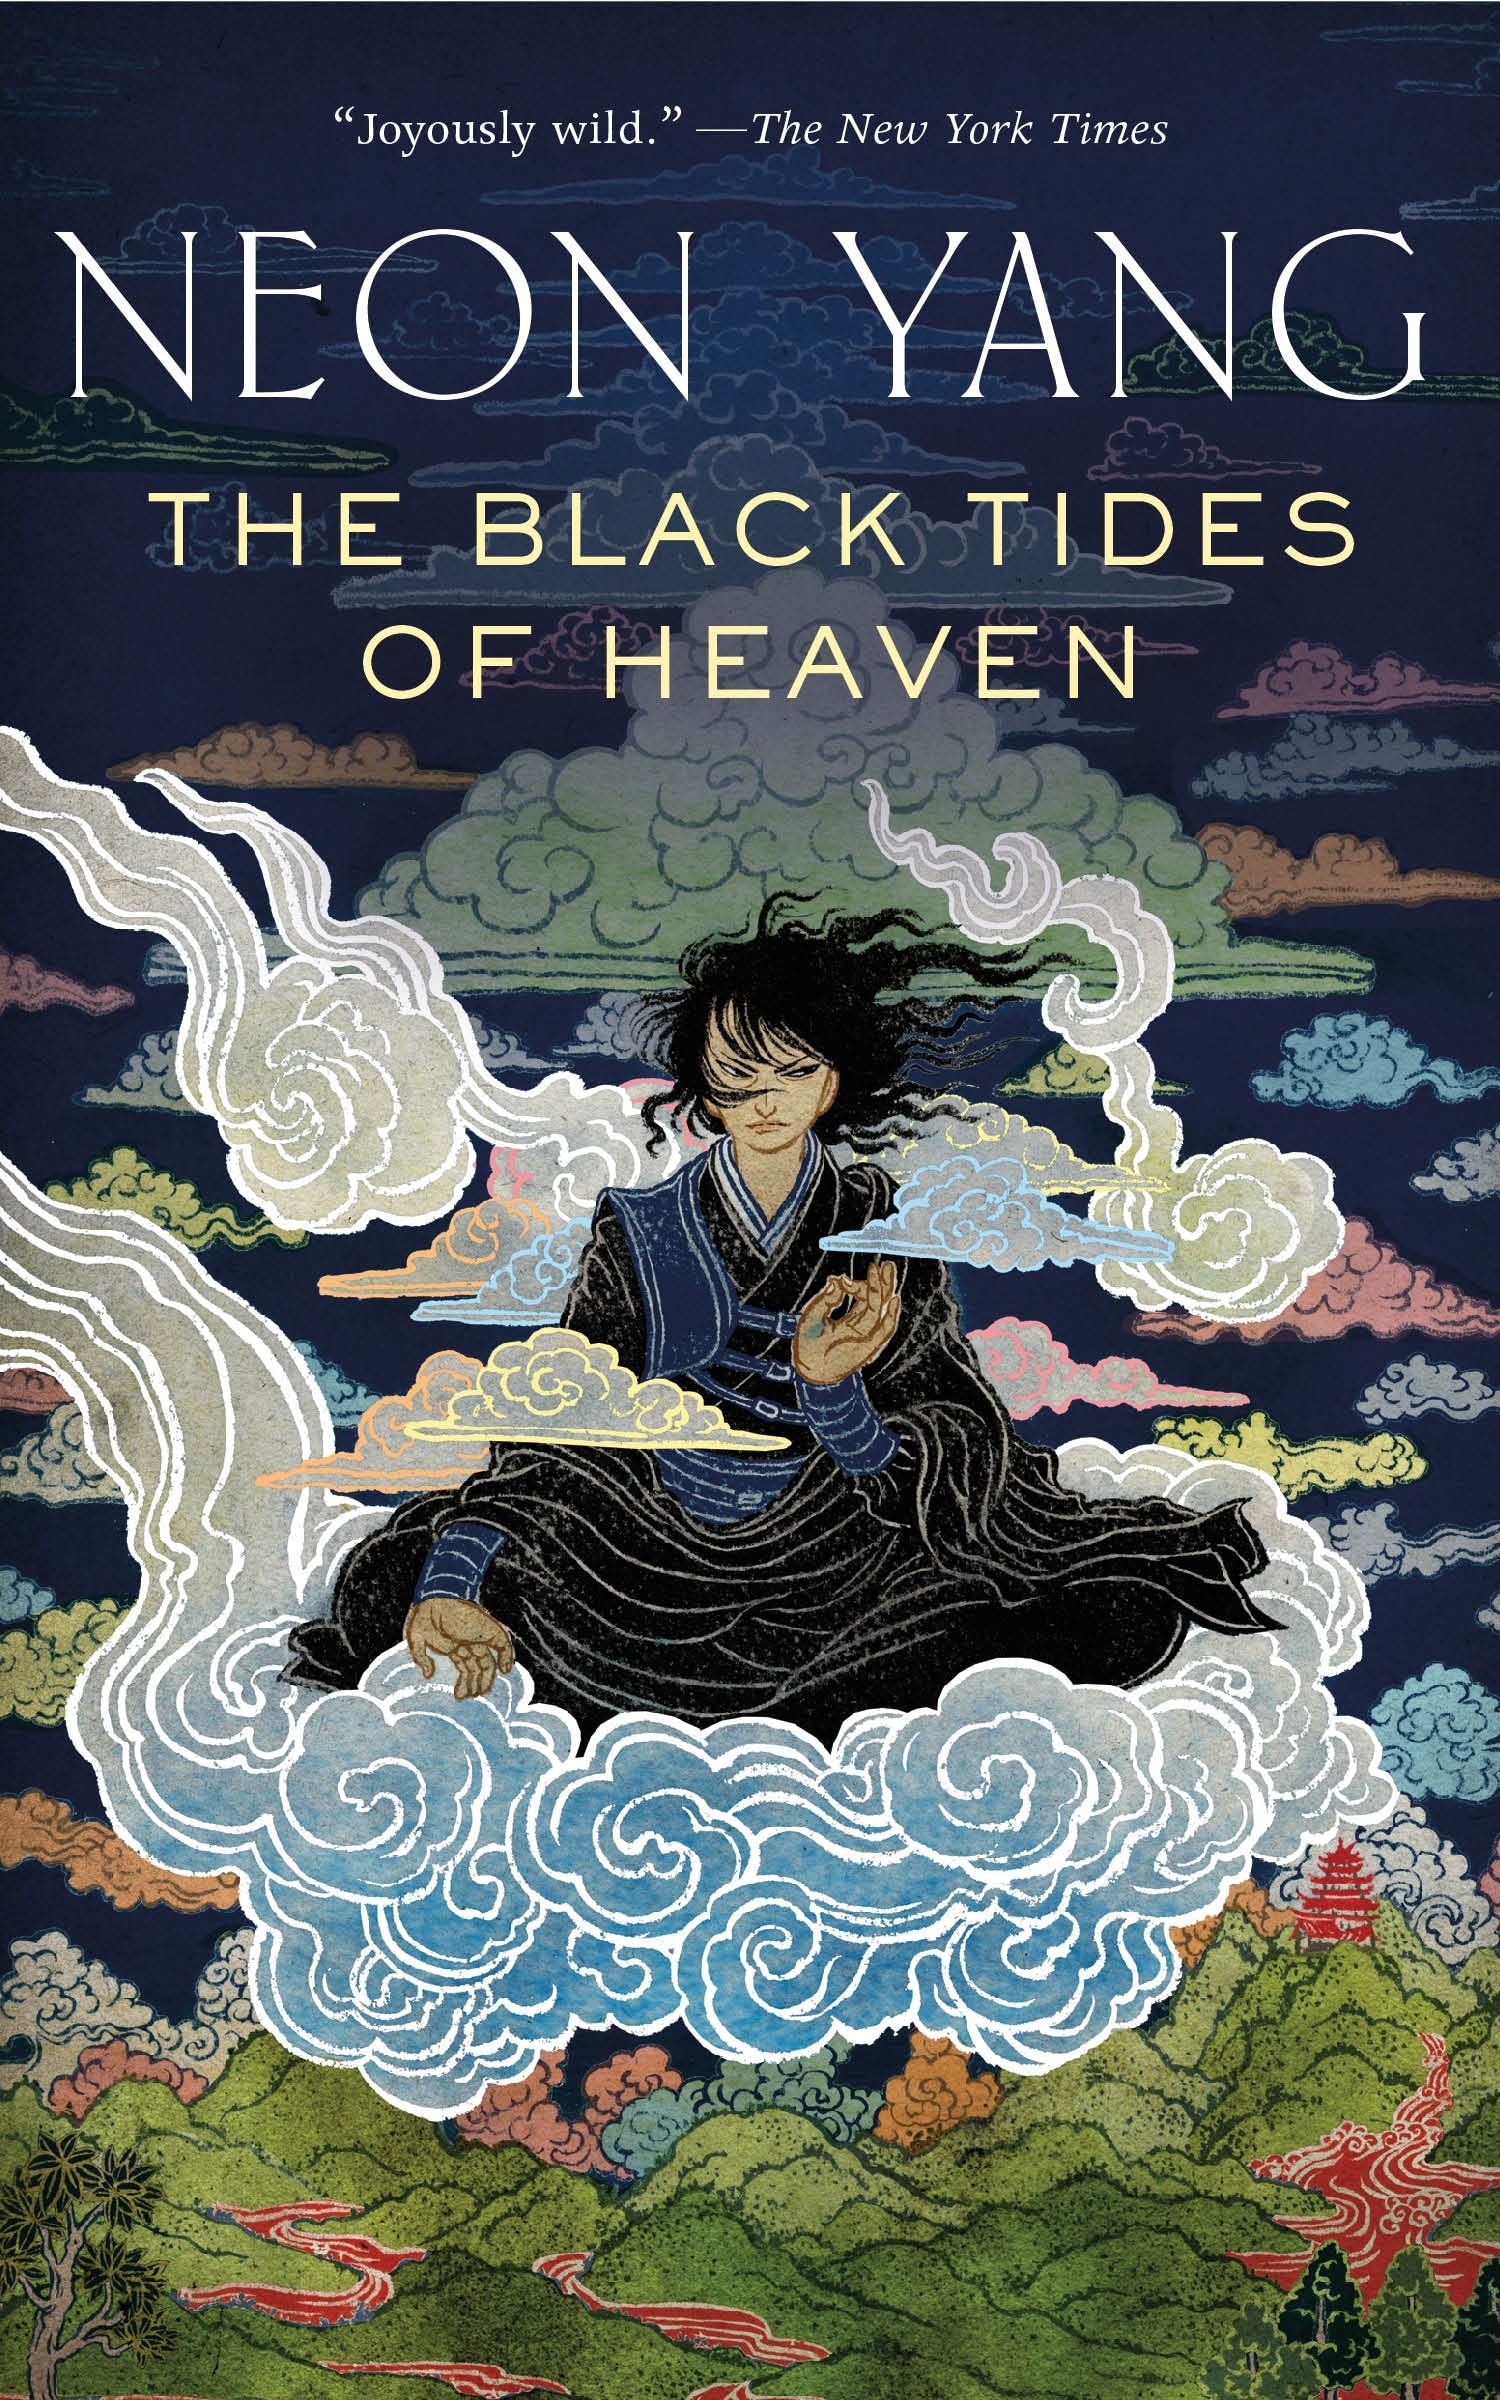 Book “The Black Tides of Heaven” by Neon Yang — September 26, 2017